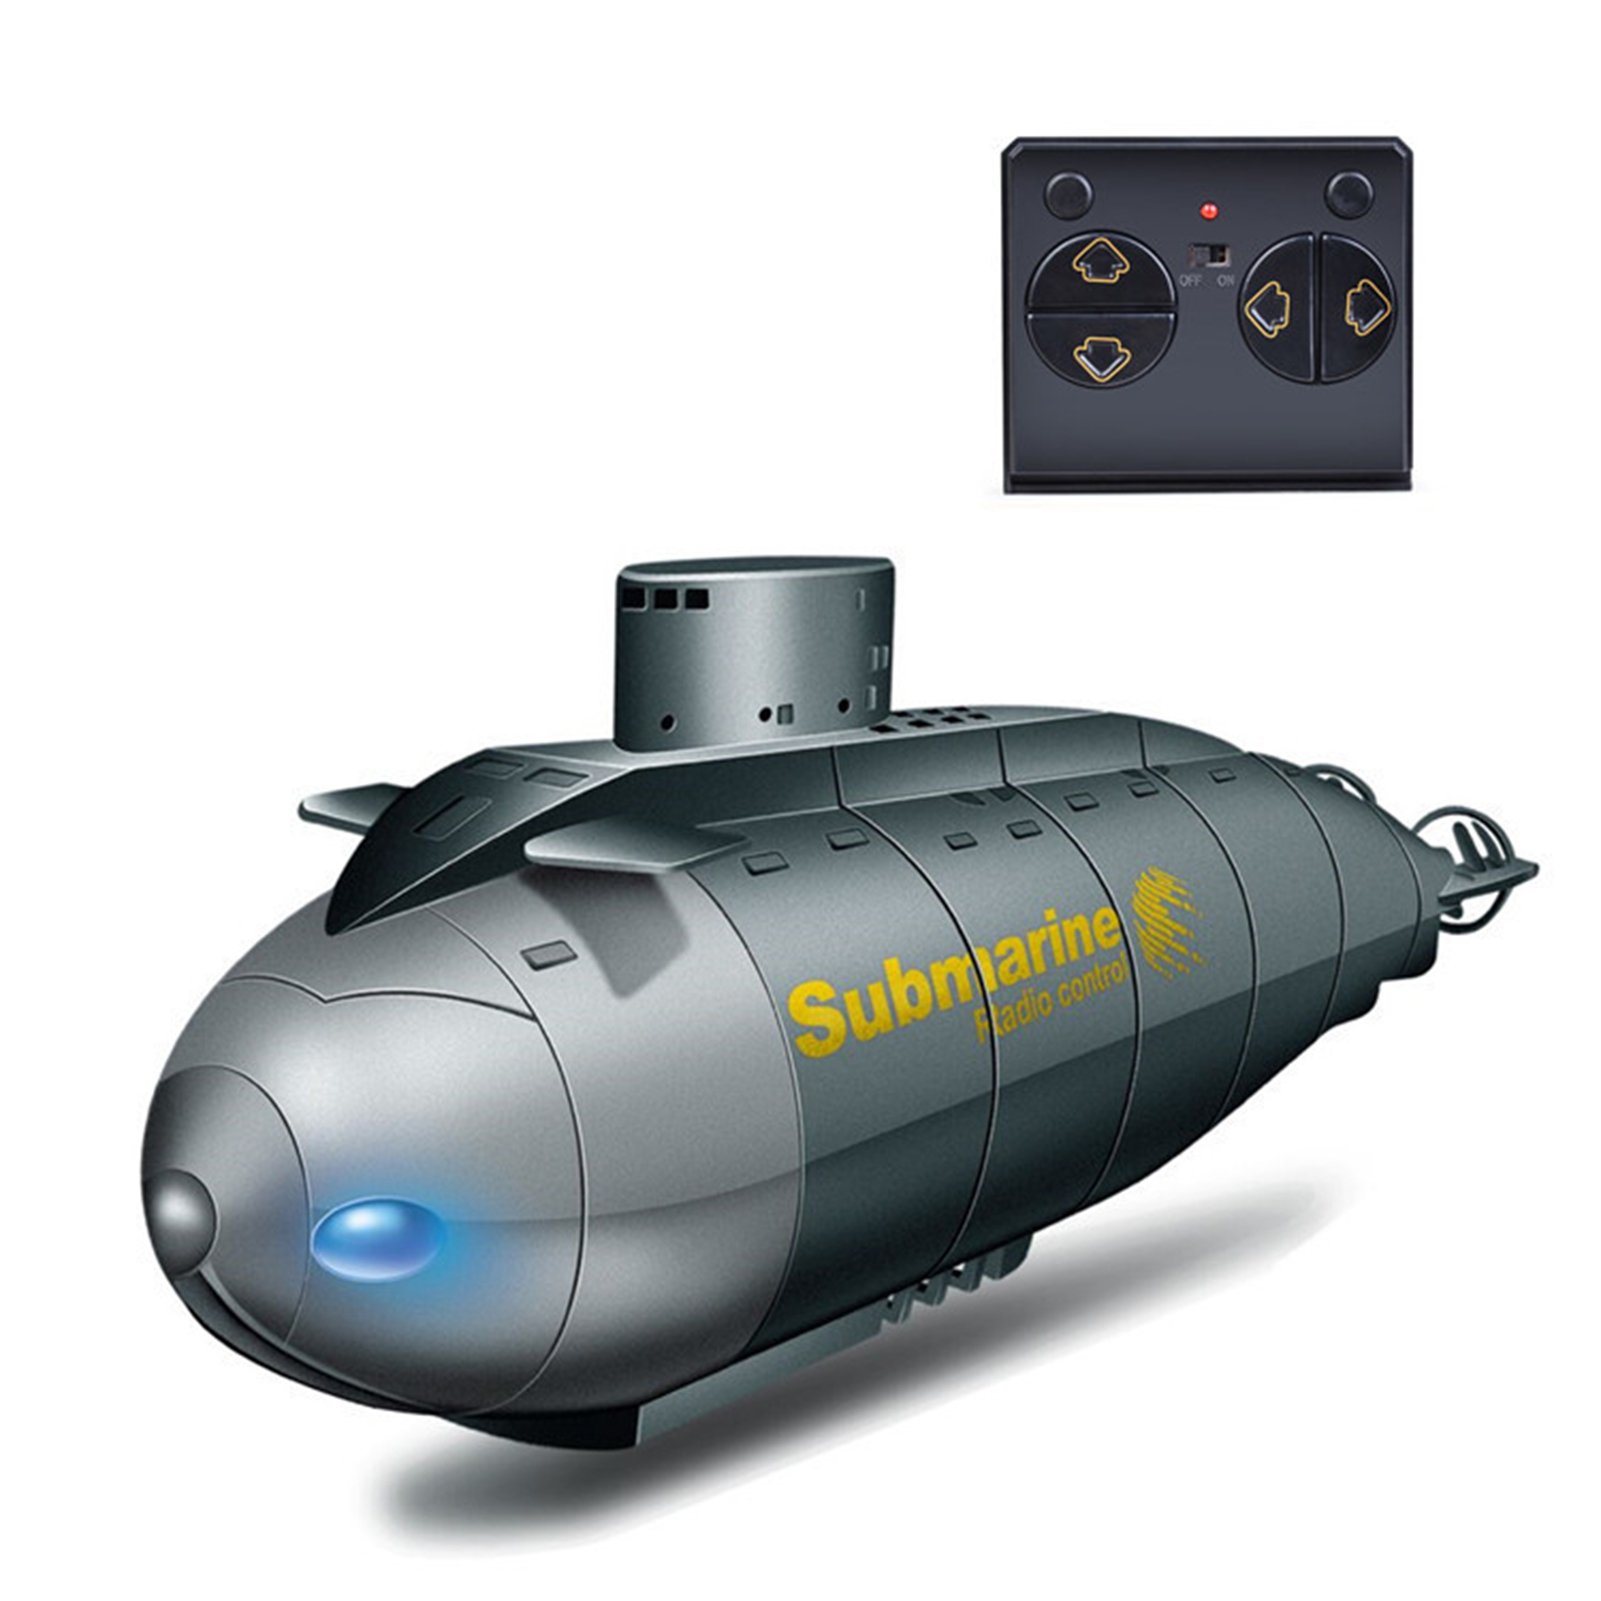 777-586 Mini RC Submarine Remote Control Boat 6CH RC Race Boat Waterproof Diving Mini RC Boat Simulation Model Gift Toy Kids Boy